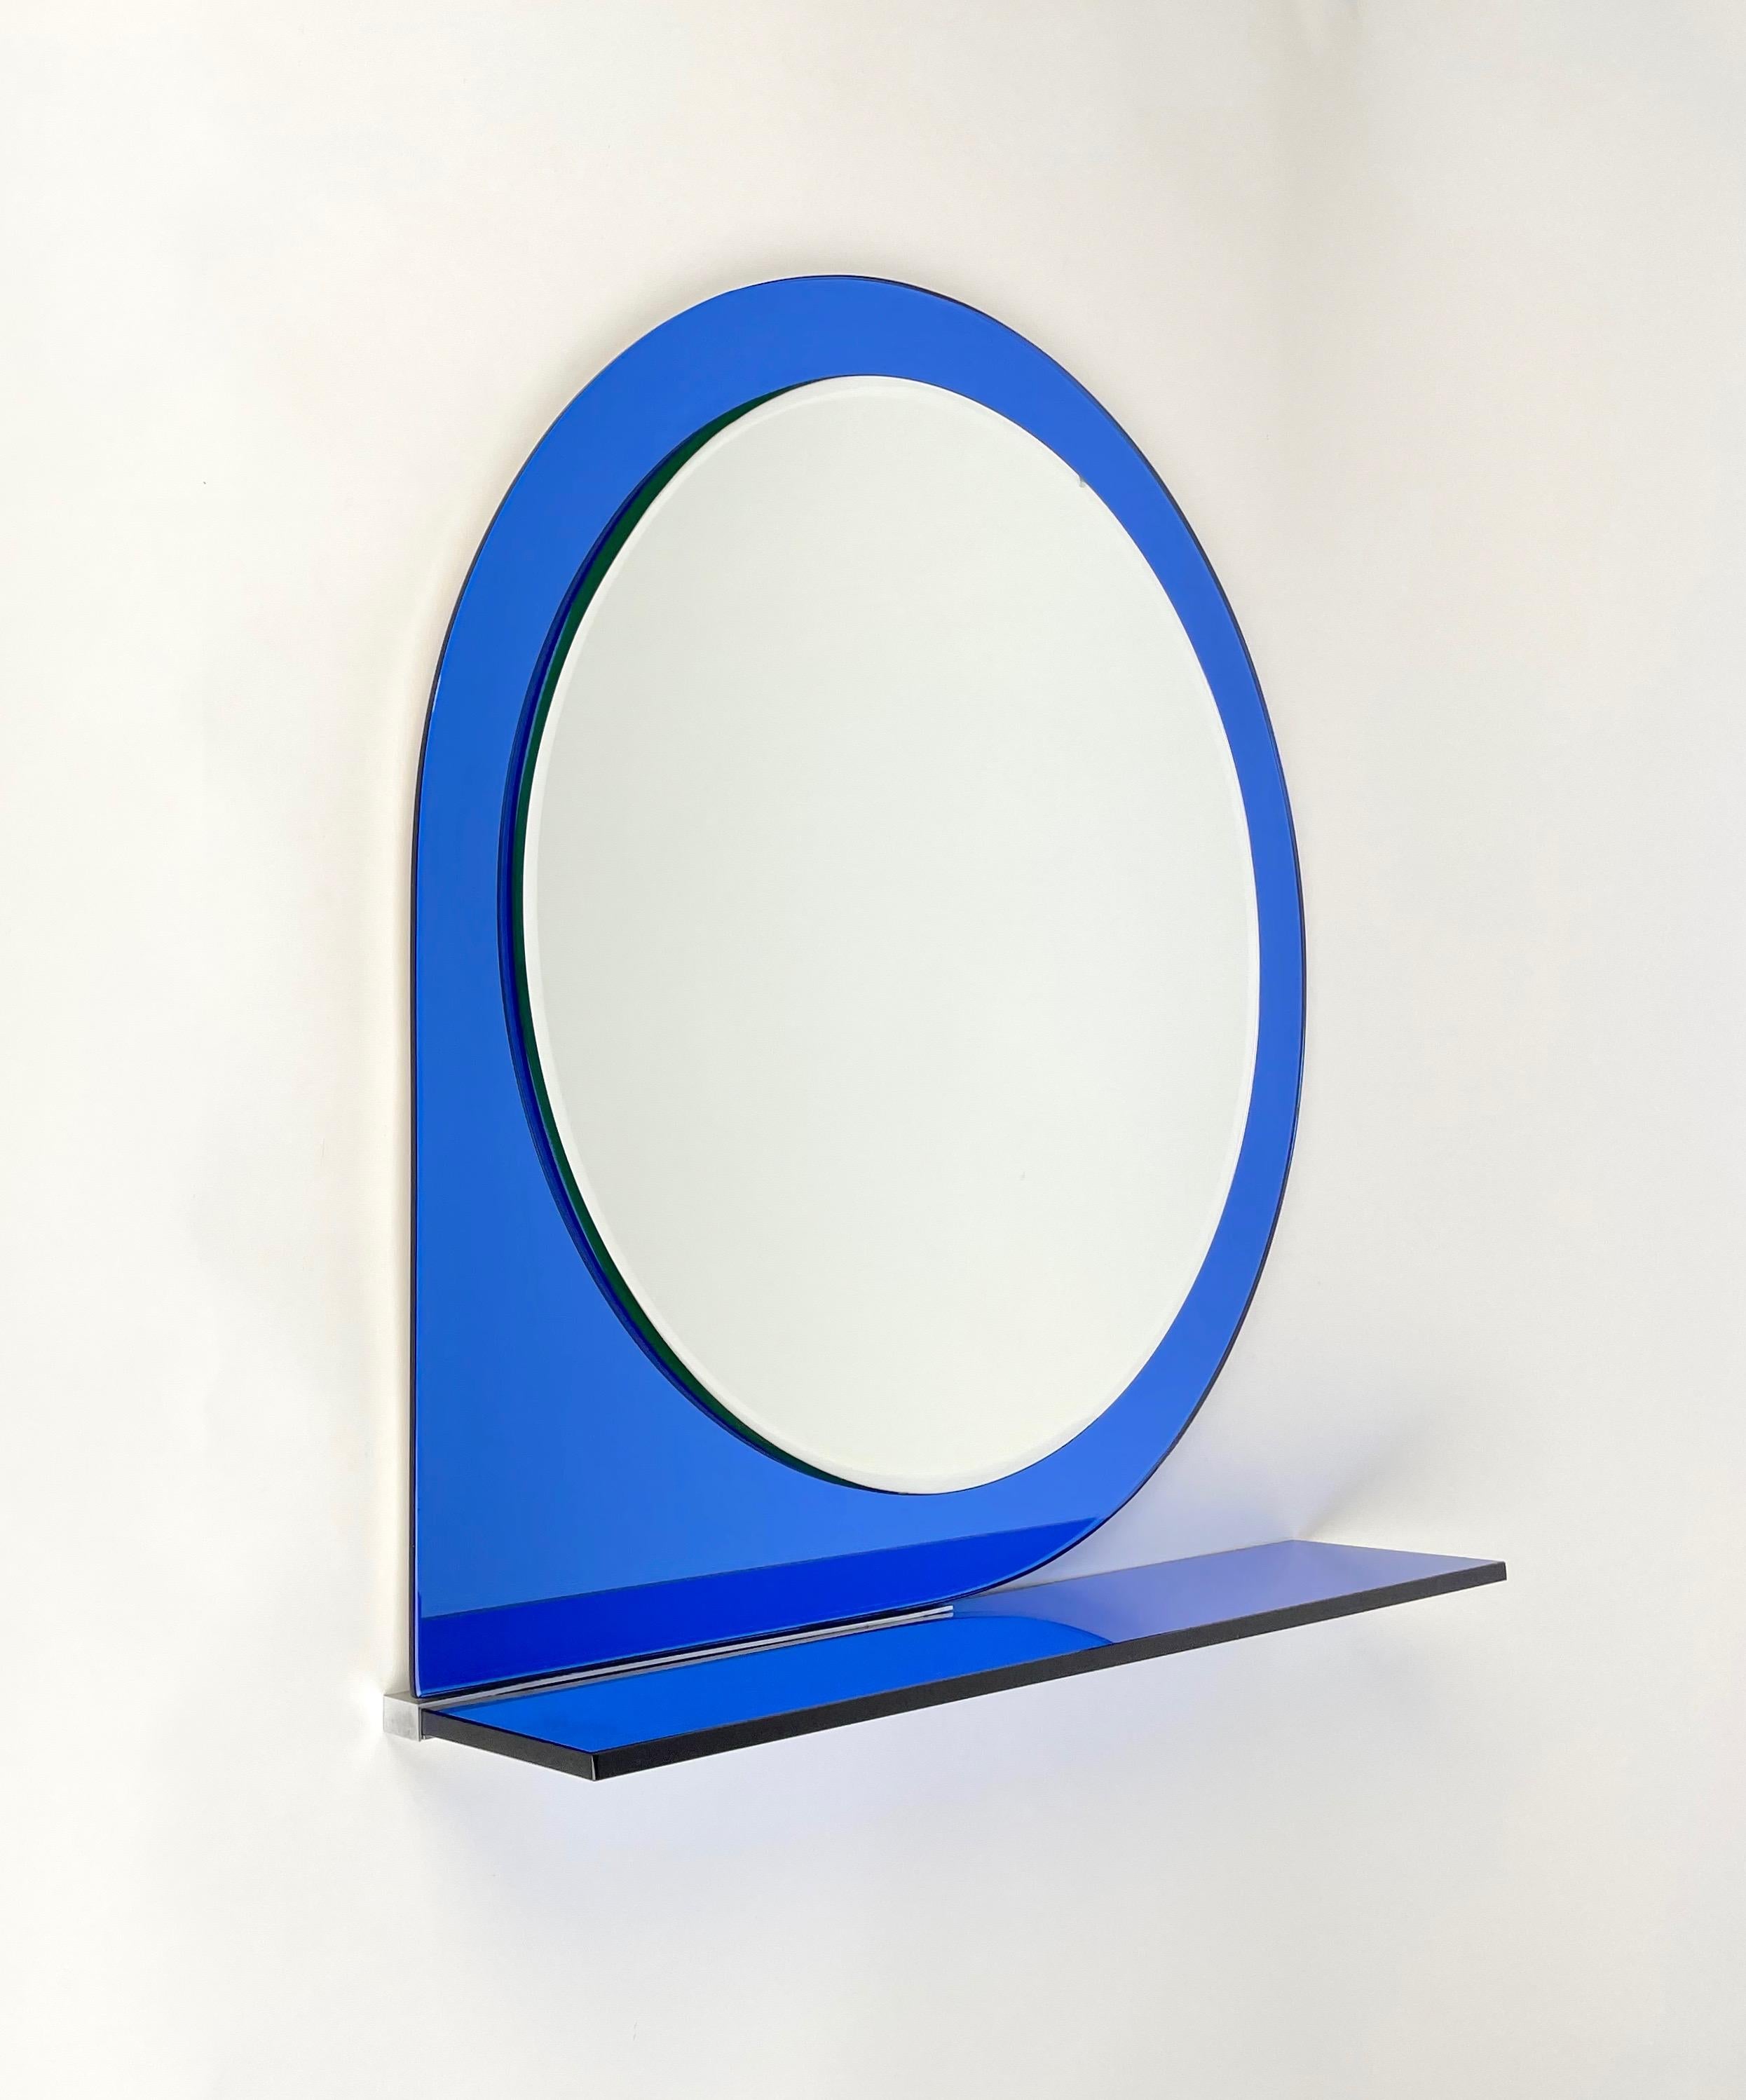 Wall mirror with shelf framed by blue glass by Sena Cristal. Made in Italy in 1974. 

The original label is still attached on the back of the mirror, as shown in the pictures.